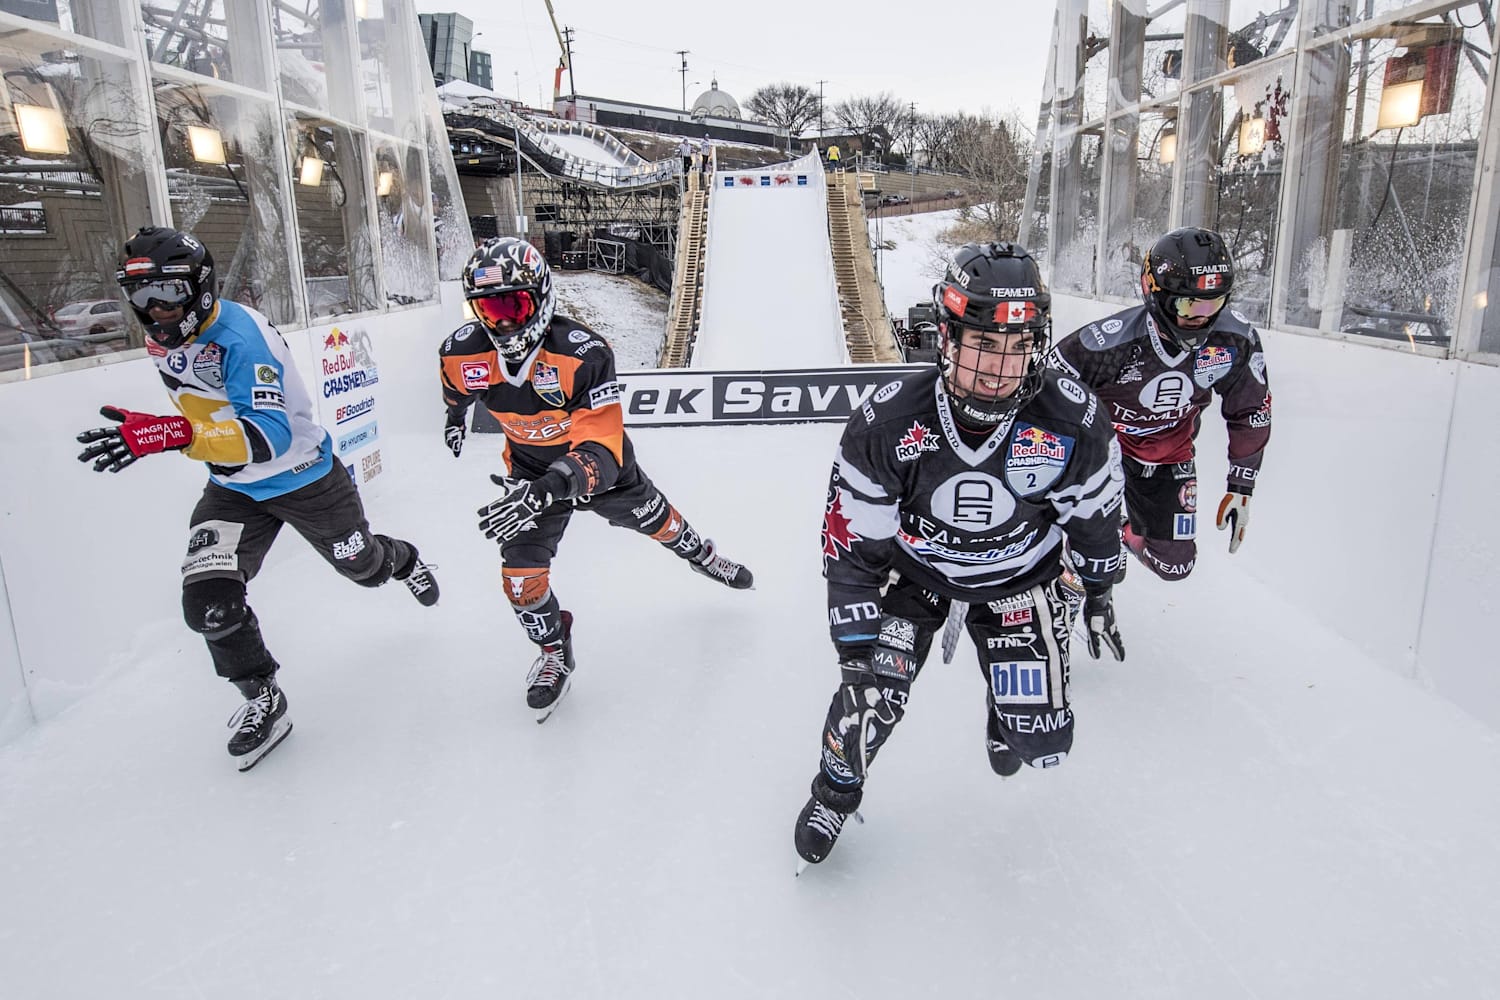 Red Bull Crashed Ice: Final in Edmonton, Canada